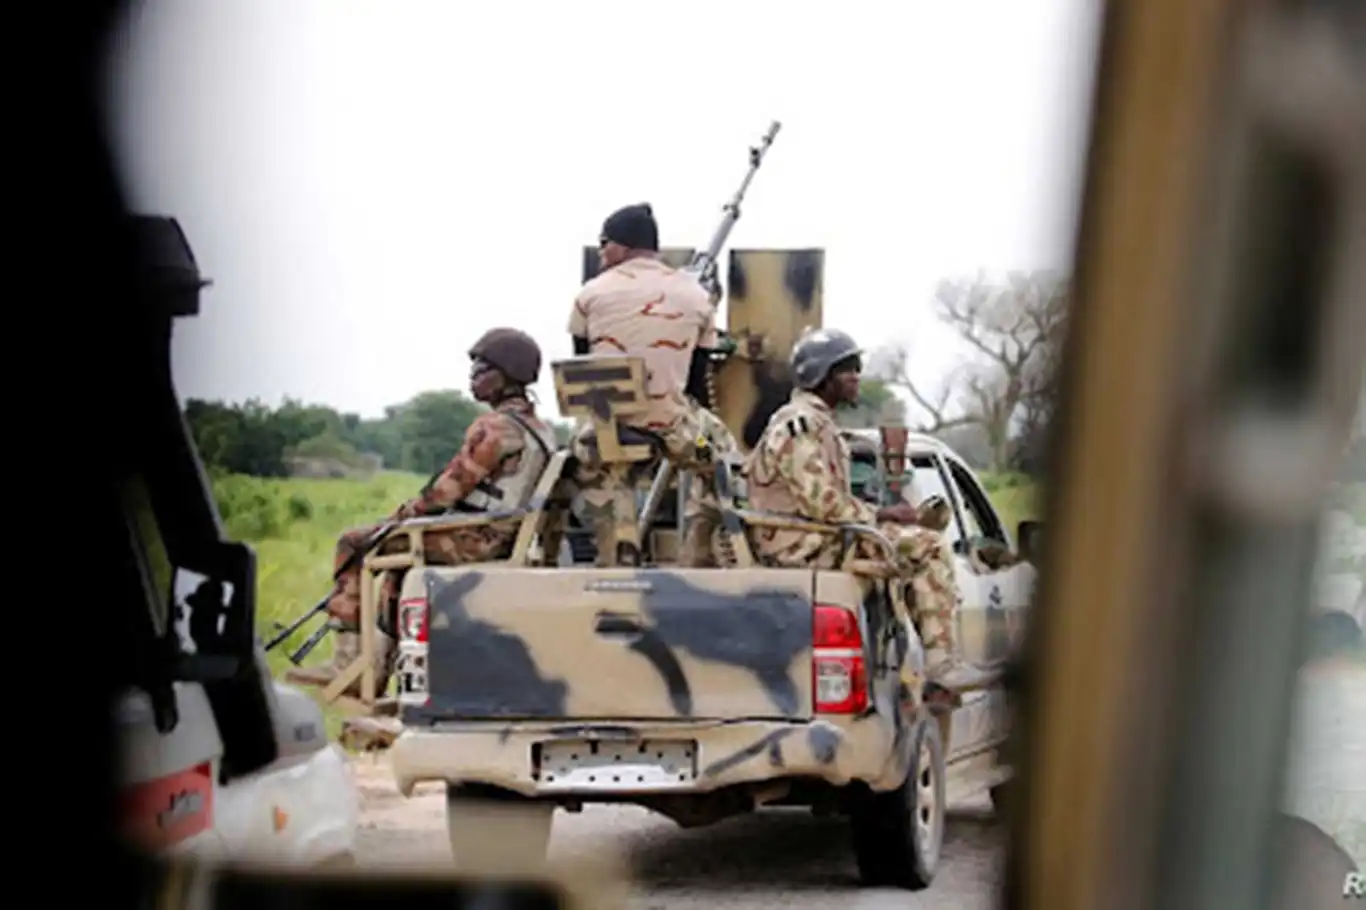 Nigeria: Bandits kill soldiers, abduct captain in Niger state attack